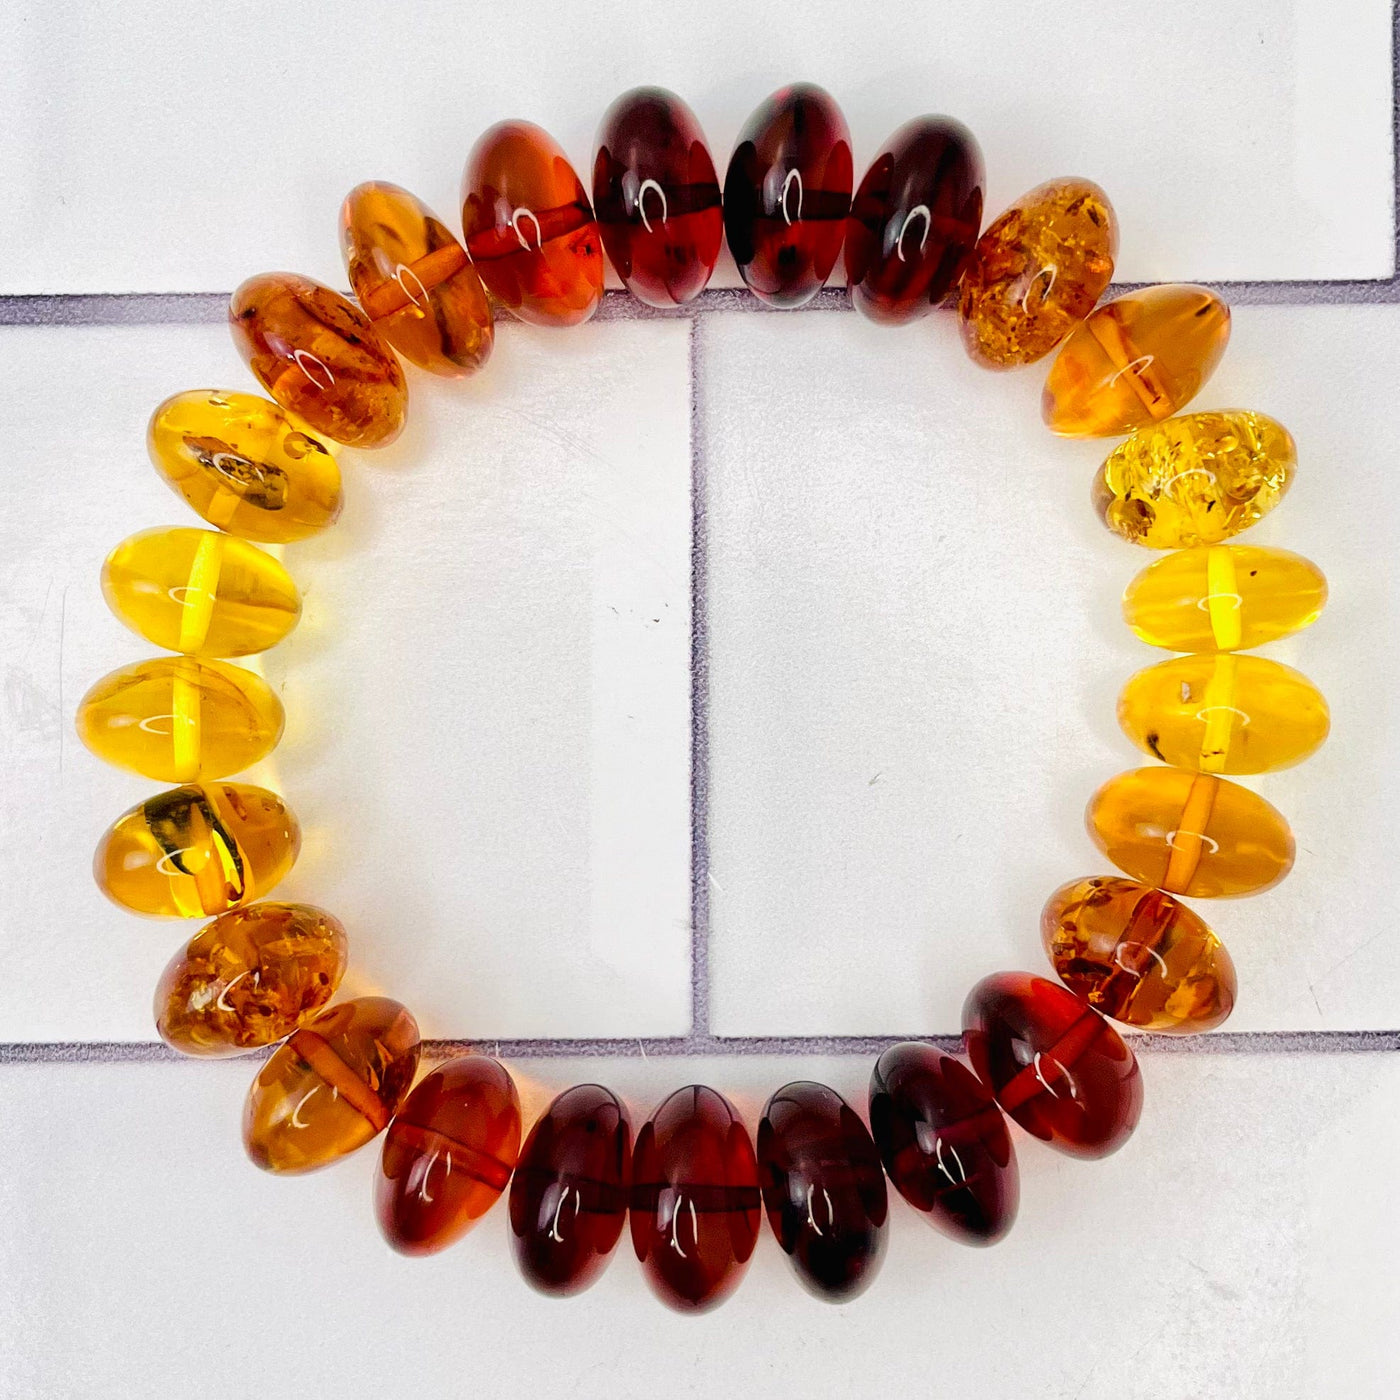 Aerial view of Baltic Amber Bracelet on a tile surface.